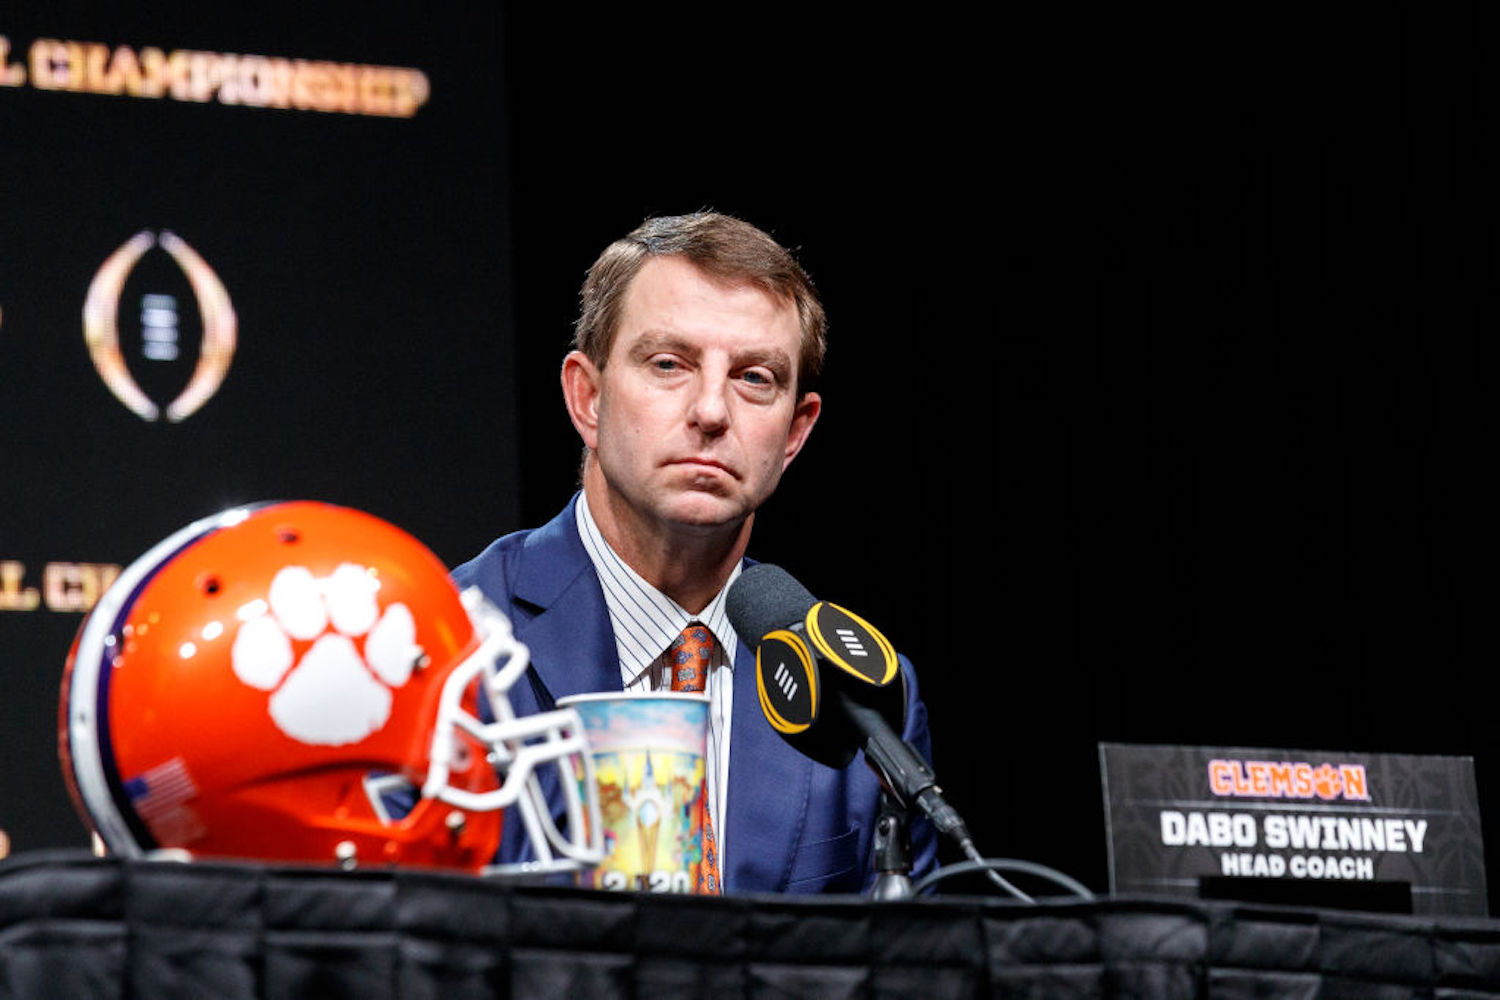 Clemson has been a virtual lock to make the College Football Playoff in recent years, but their road to the 2020 CFP just got a lot tougher.